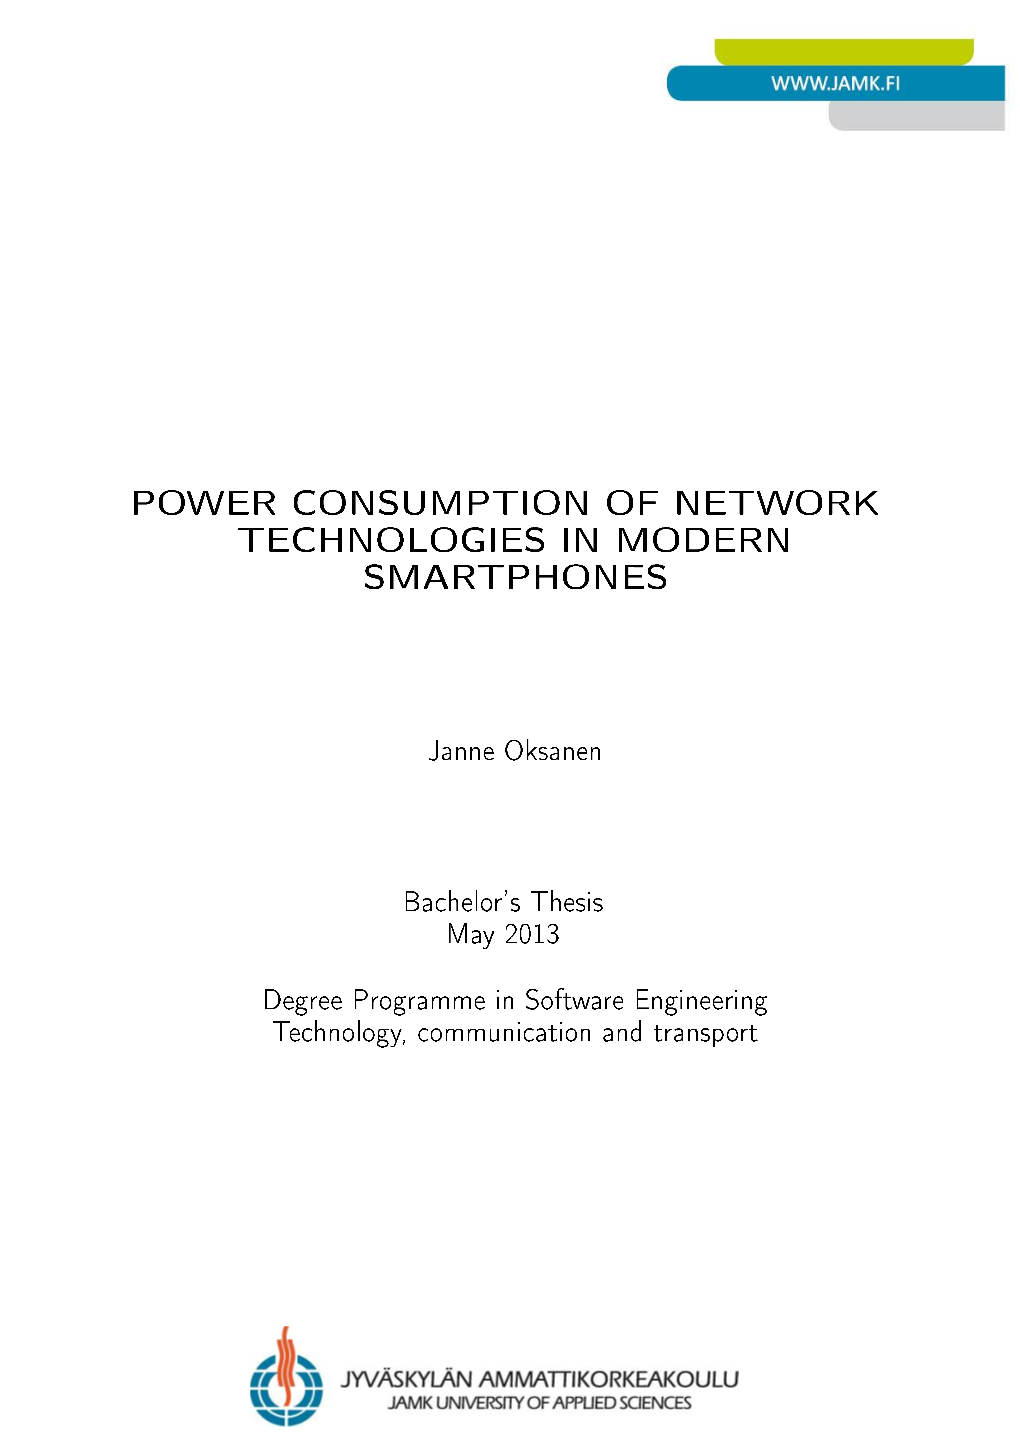 Power Consumption of Network Technologies in Modern Smartphones